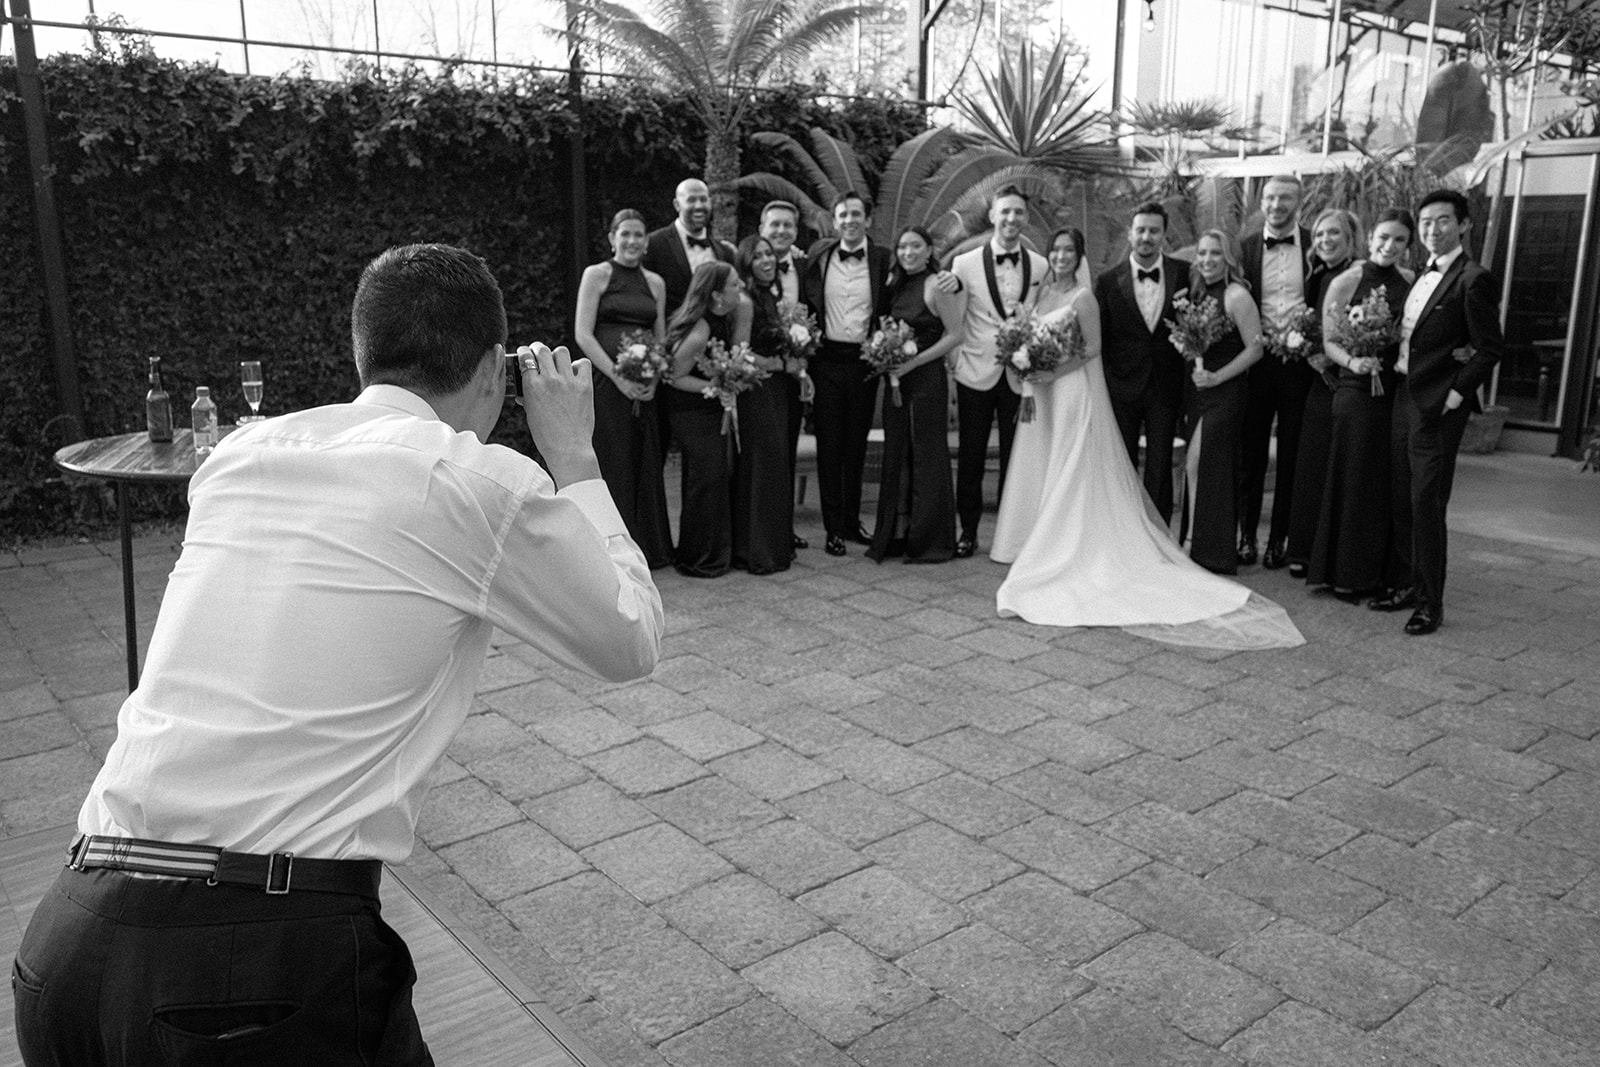 Candid film photo of a wedding guest taking a photo of the wedding party in black and white.